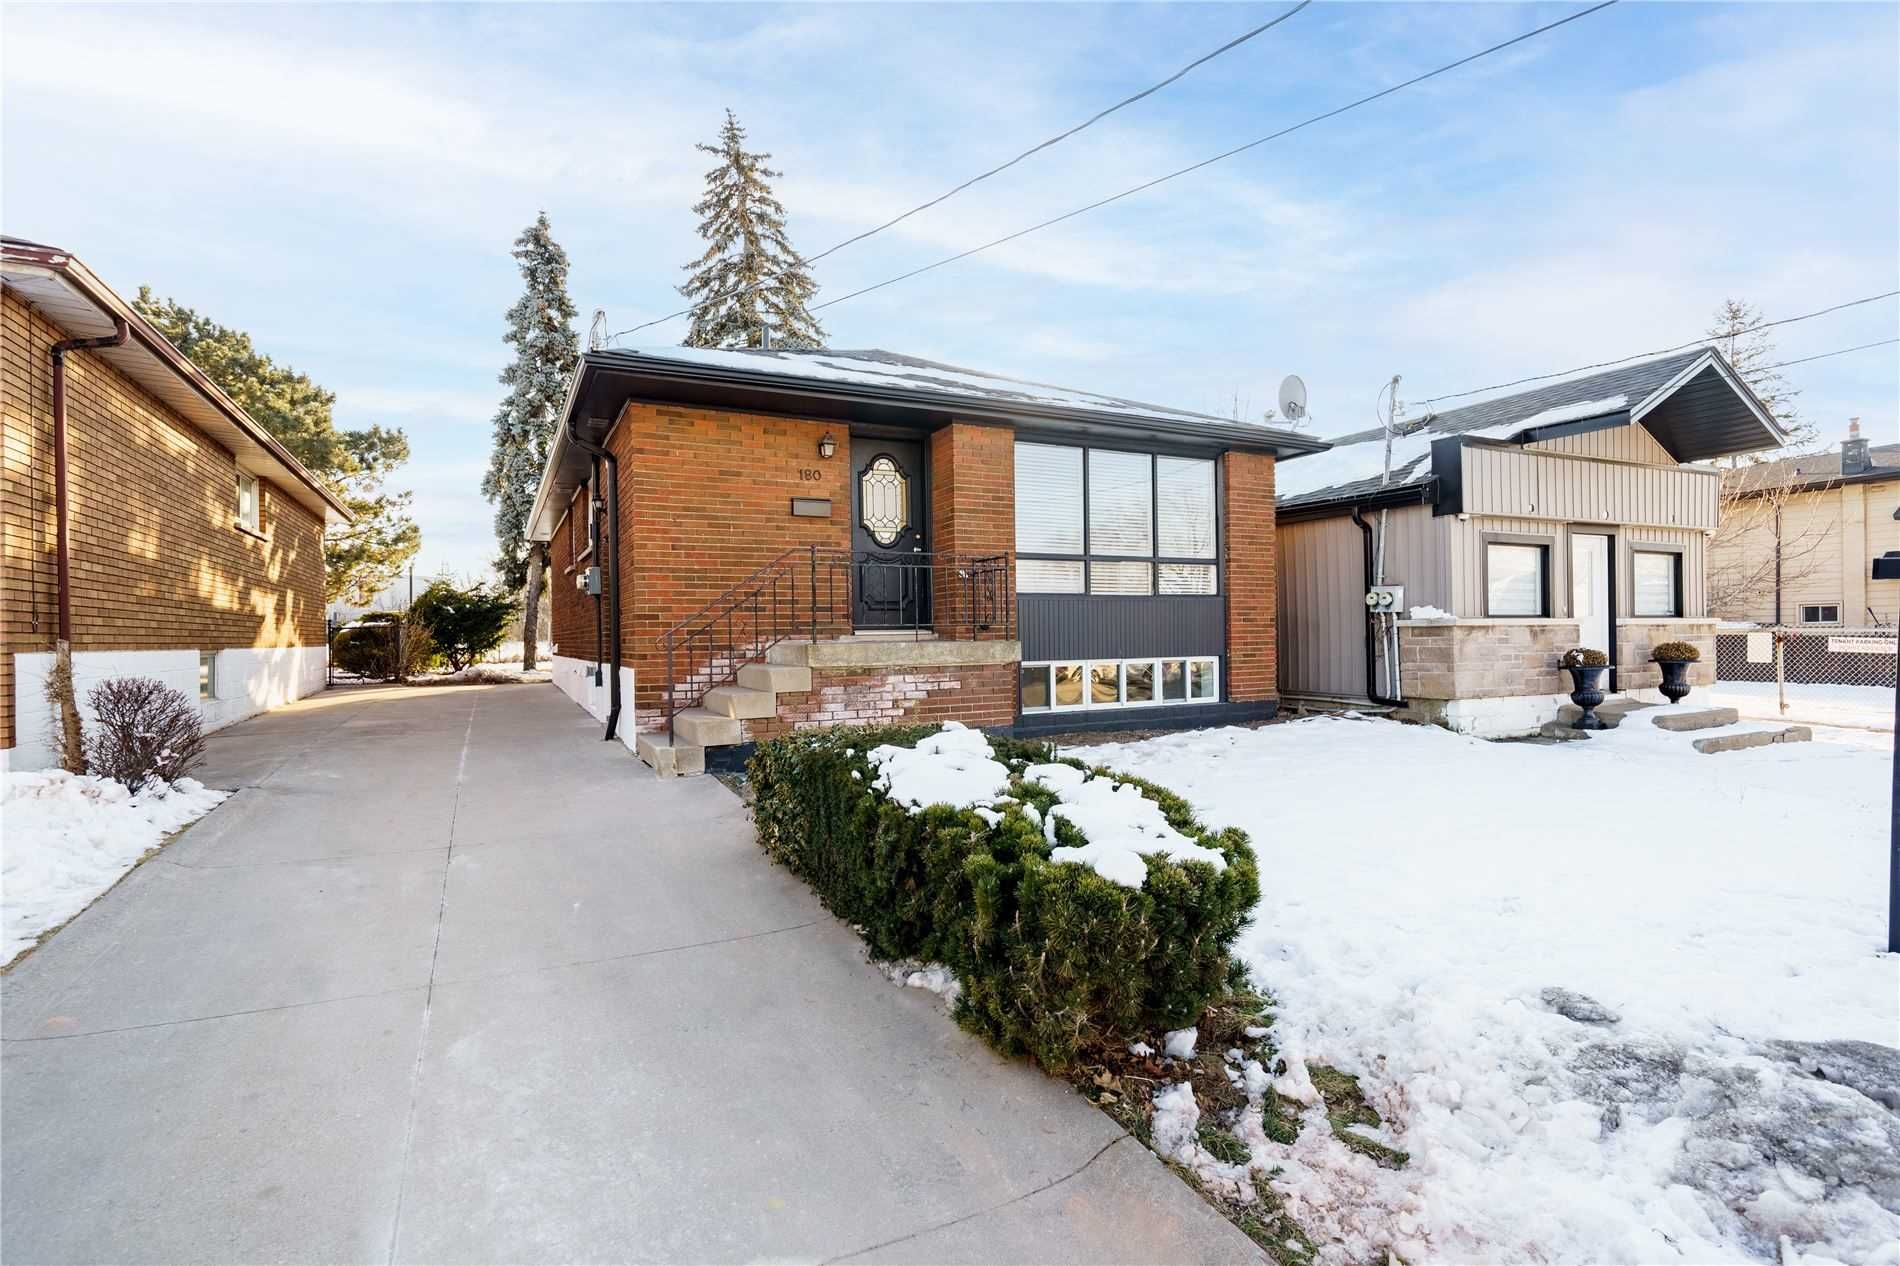 New property listed in Parkview, Hamilton